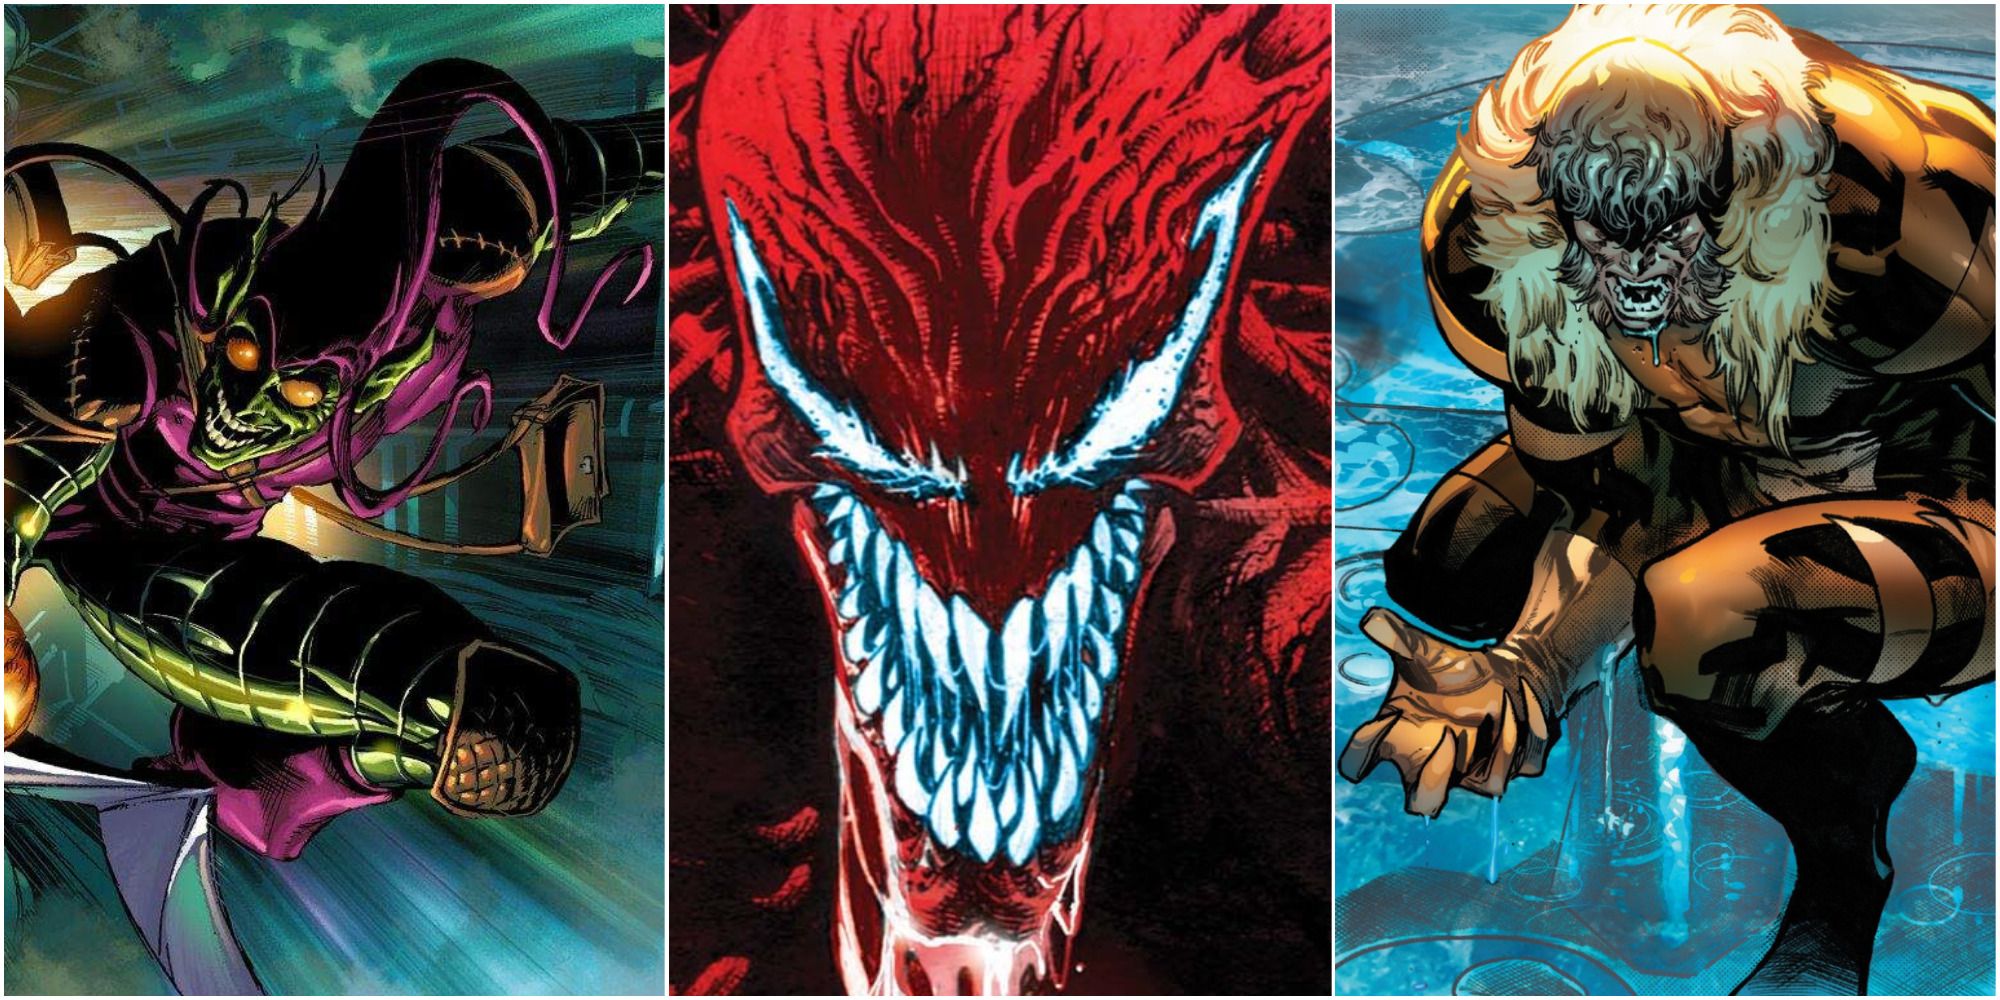 Green Goblin, Carnage, and Sabretooth